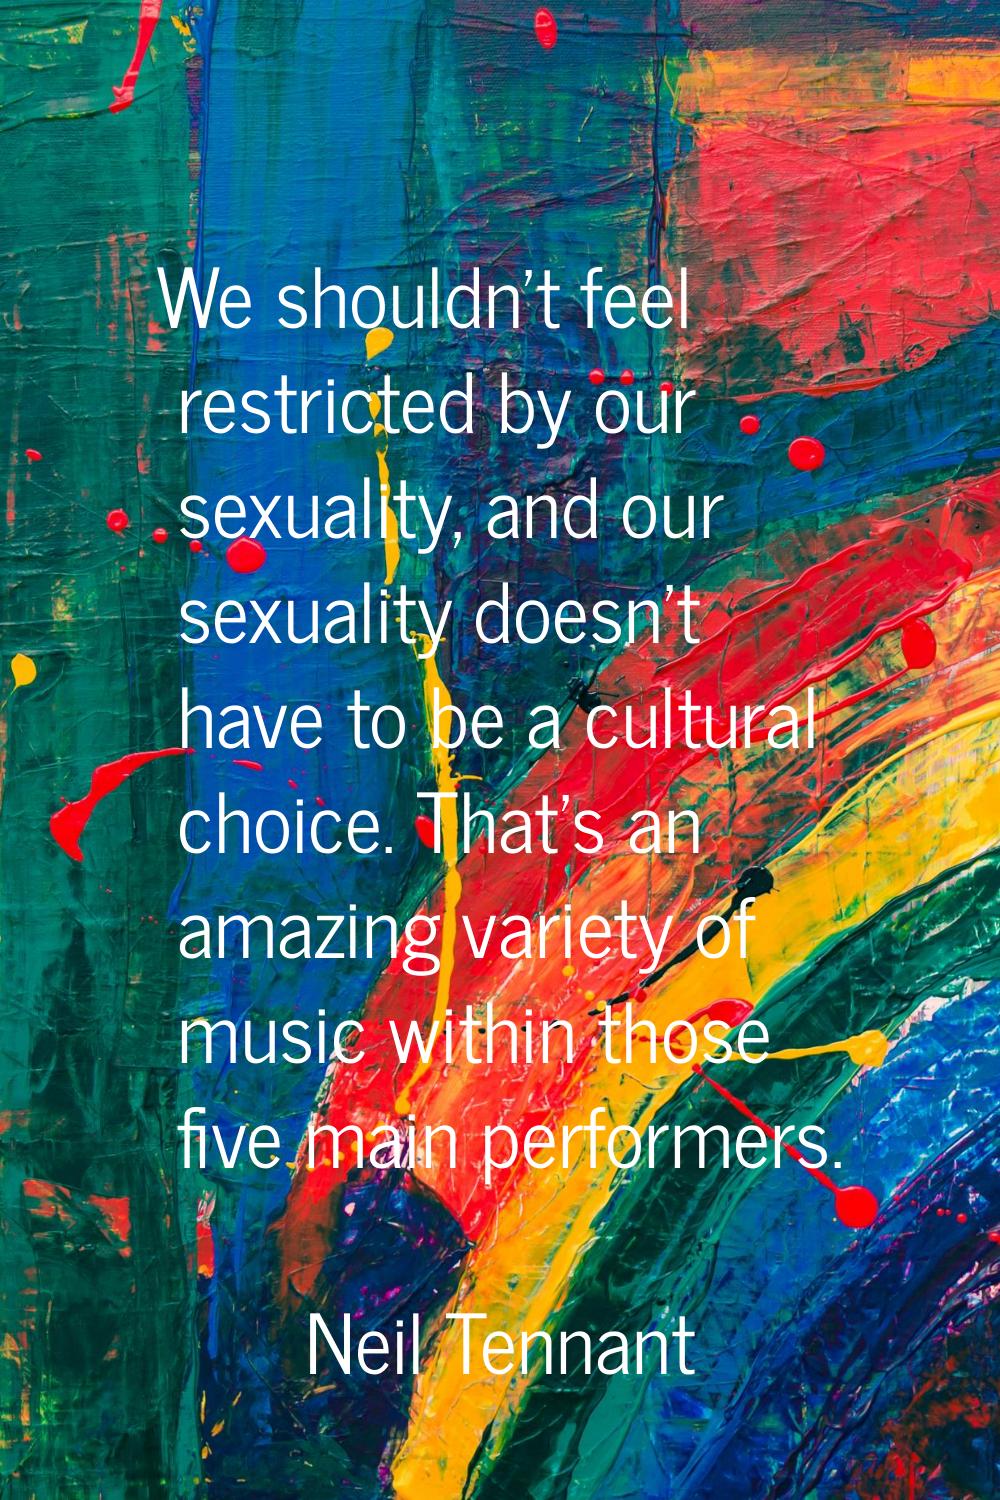 We shouldn't feel restricted by our sexuality, and our sexuality doesn't have to be a cultural choi